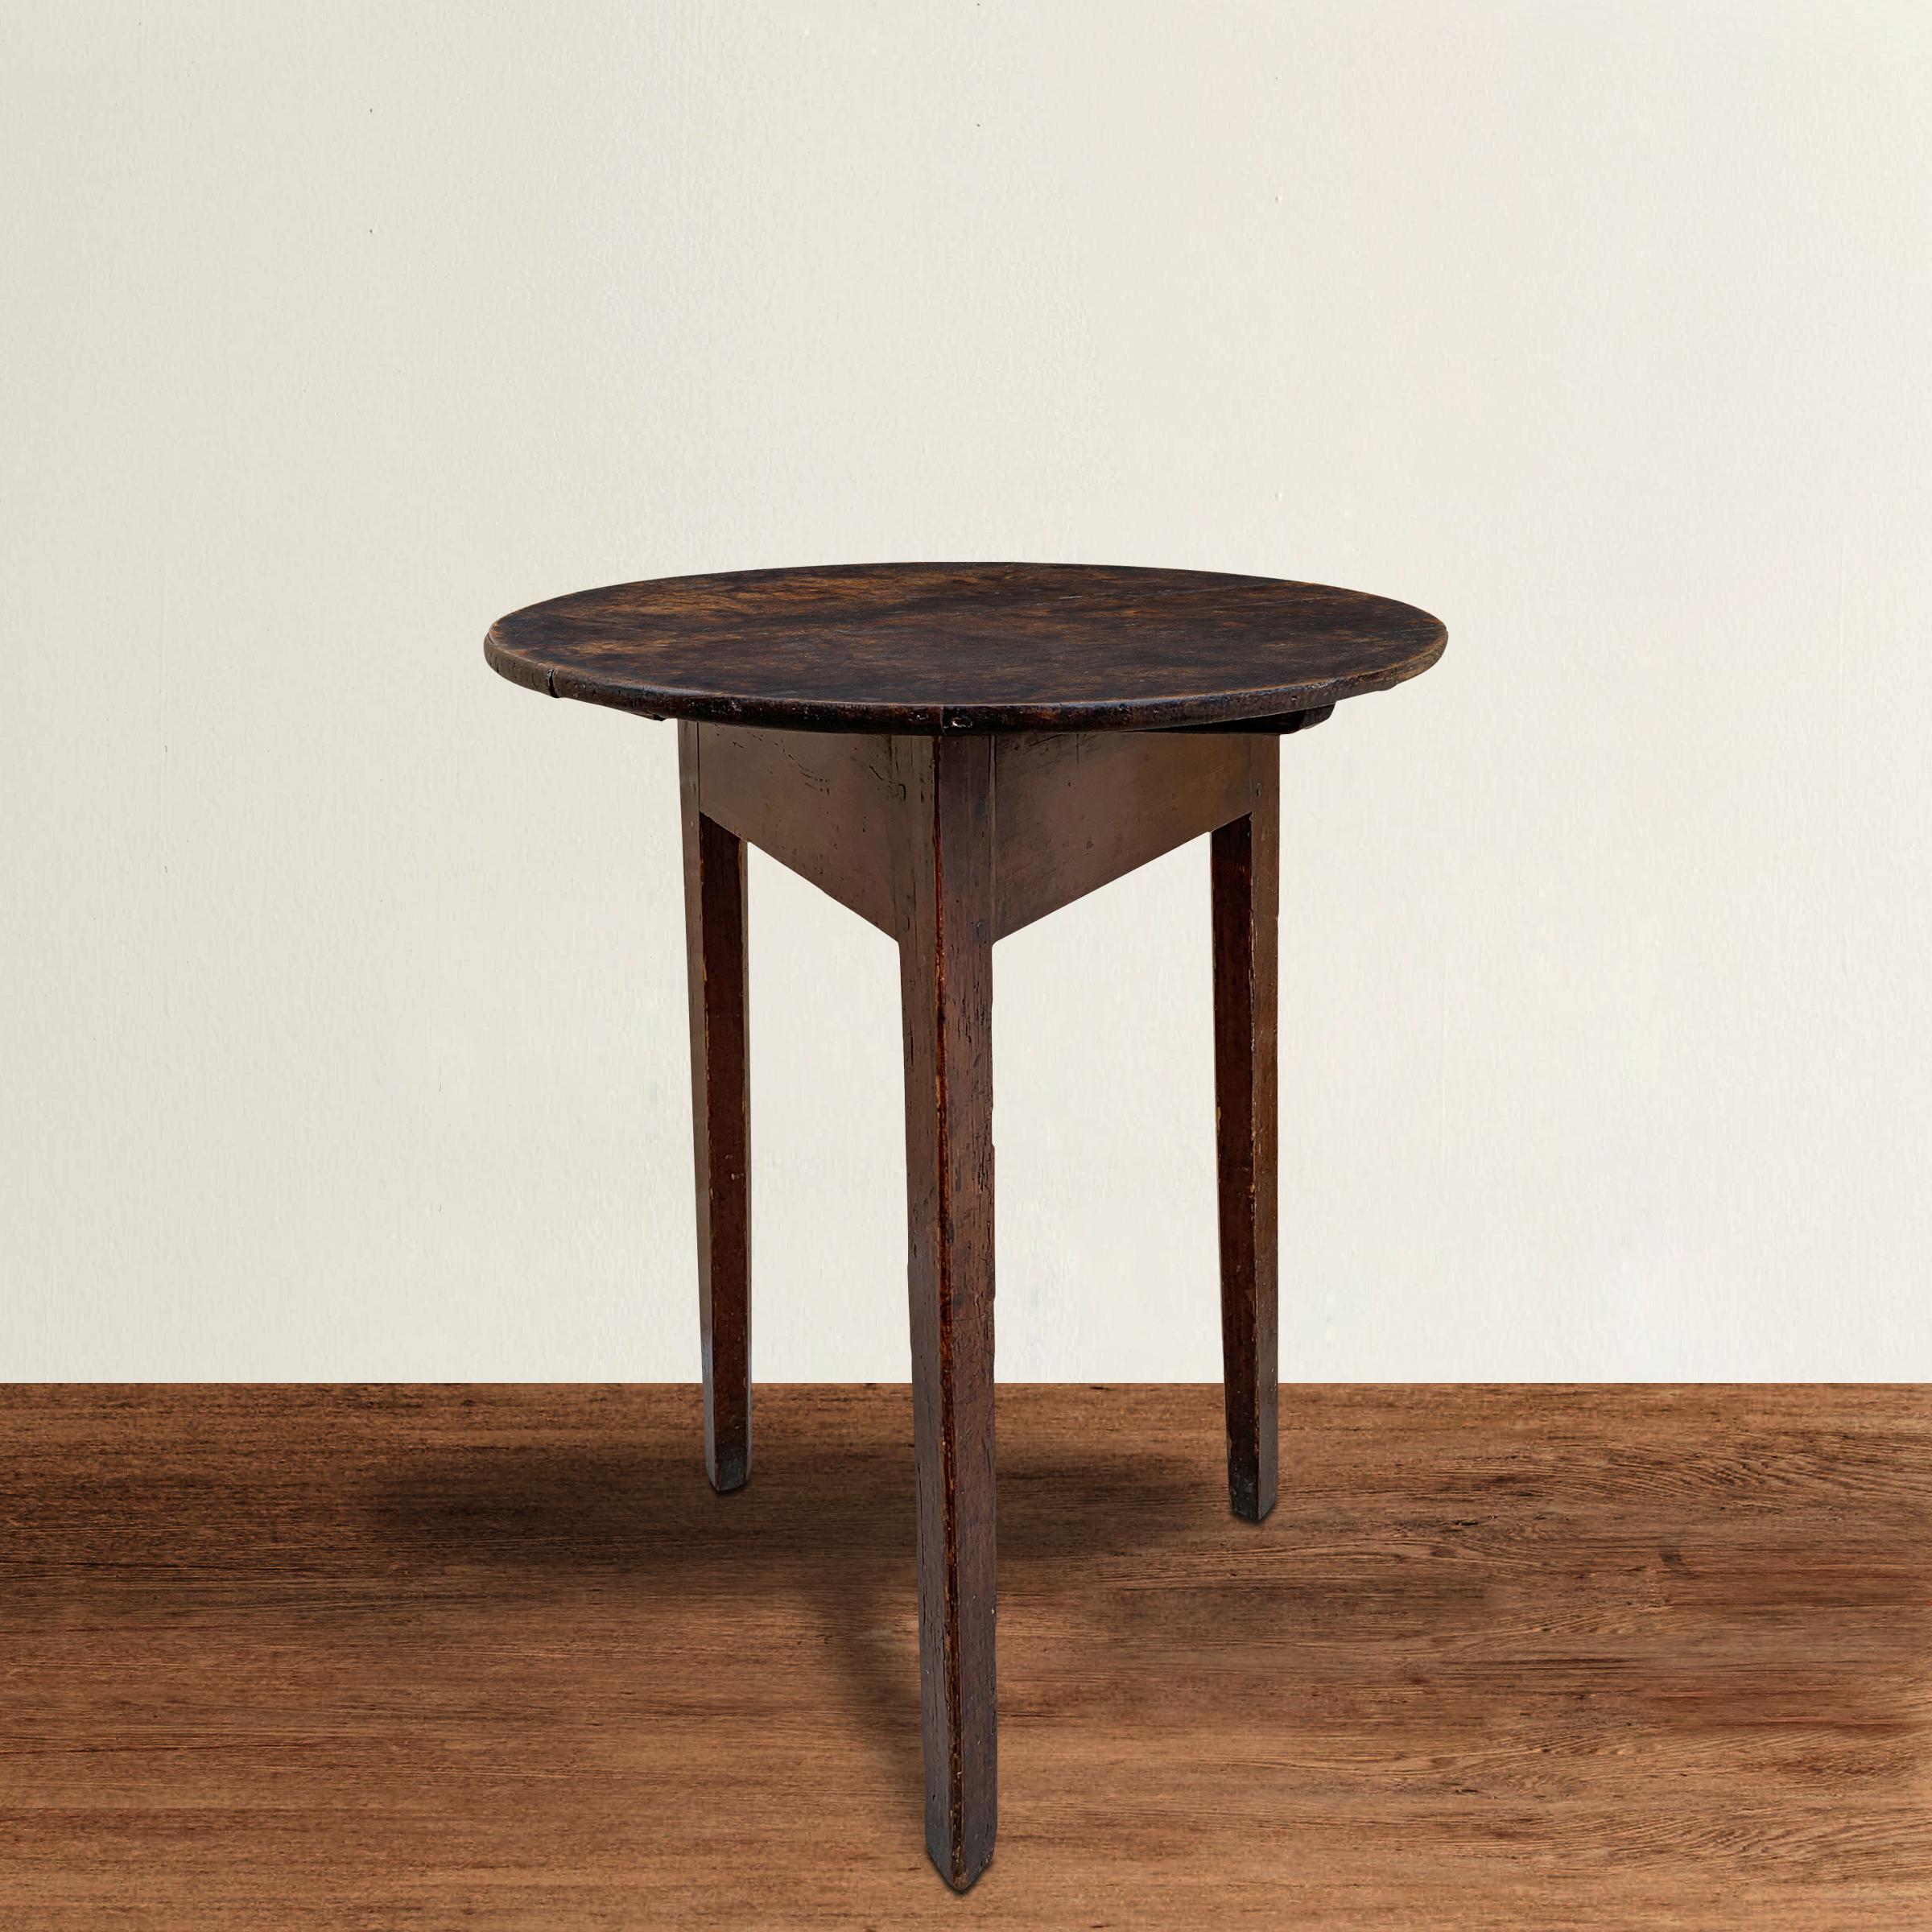 A simple 18th century English cricket table with clean lines, including three gently tapered legs pegged to a square apron, and a round top with a beautiful well-worn finish. Cricket tables were used in pubs, and specifically designed with three